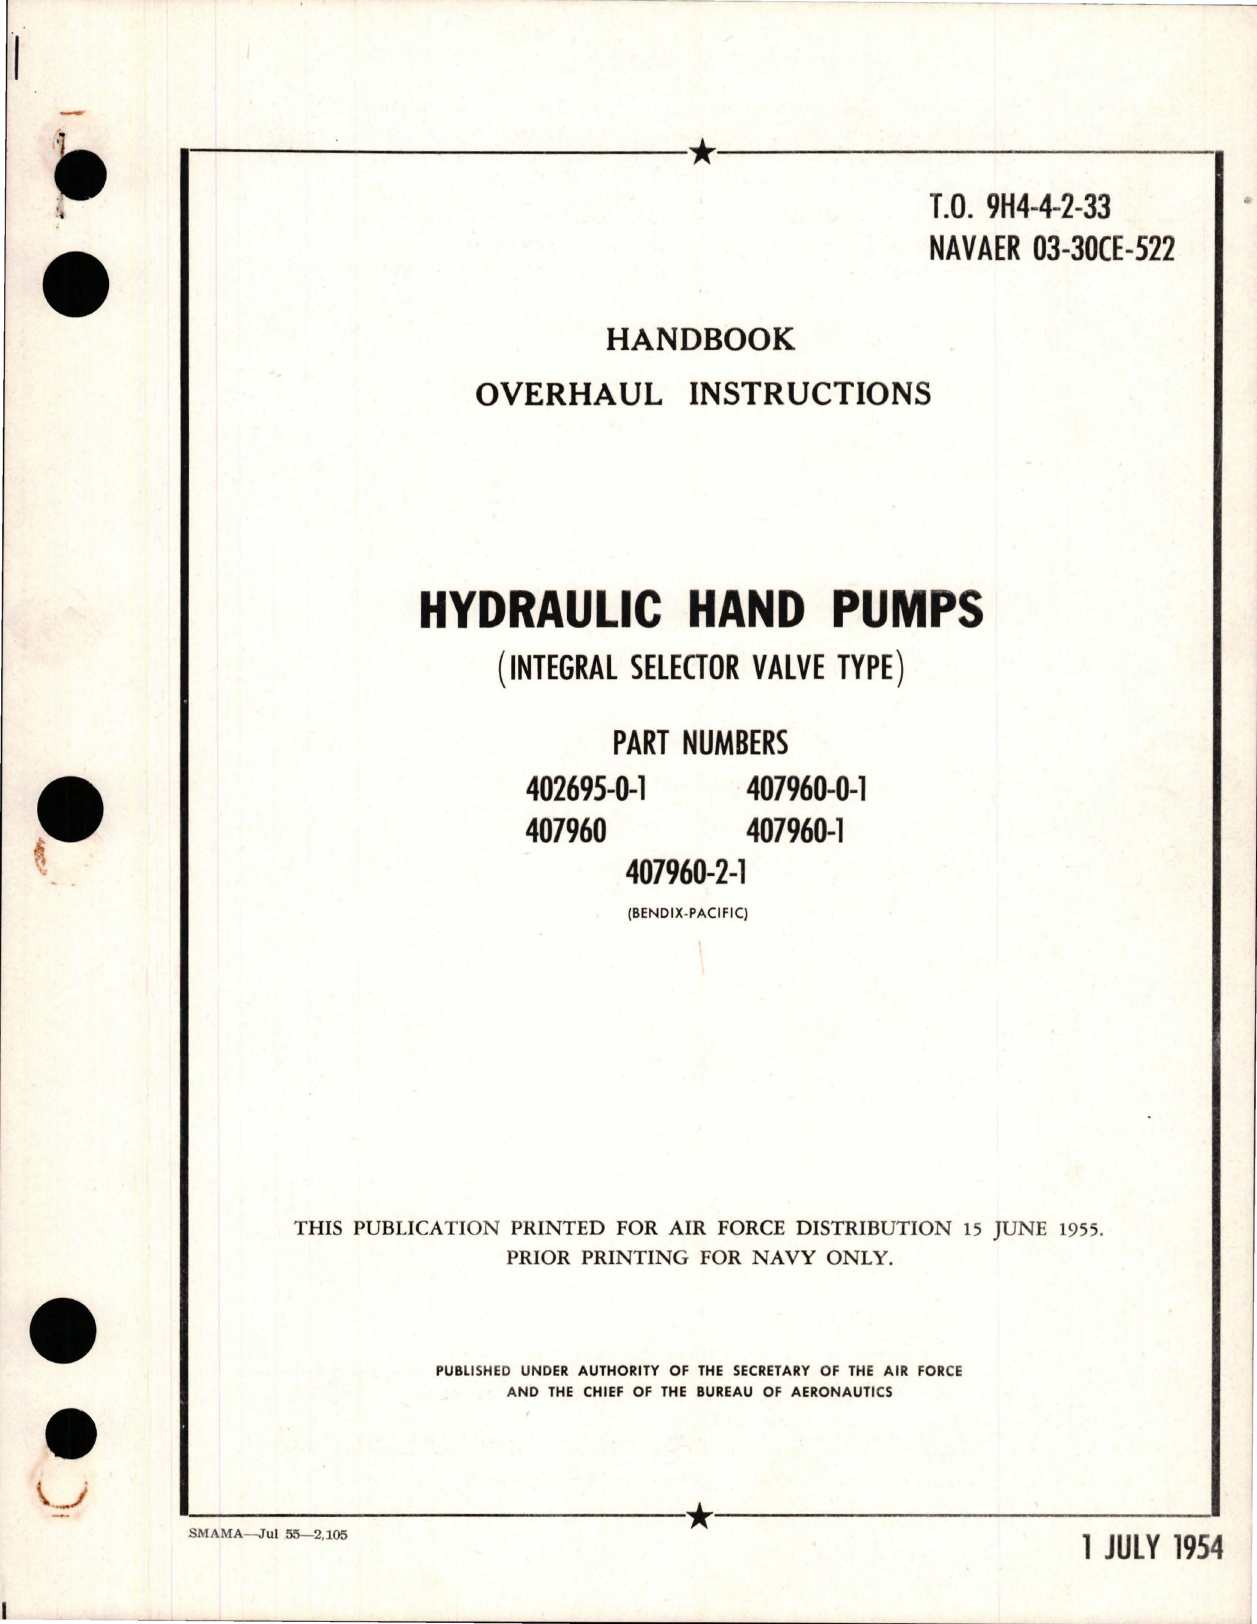 Sample page 1 from AirCorps Library document: Overhaul Instructions for Hydraulic Hand Pumps - Integral Selector Valve Type 